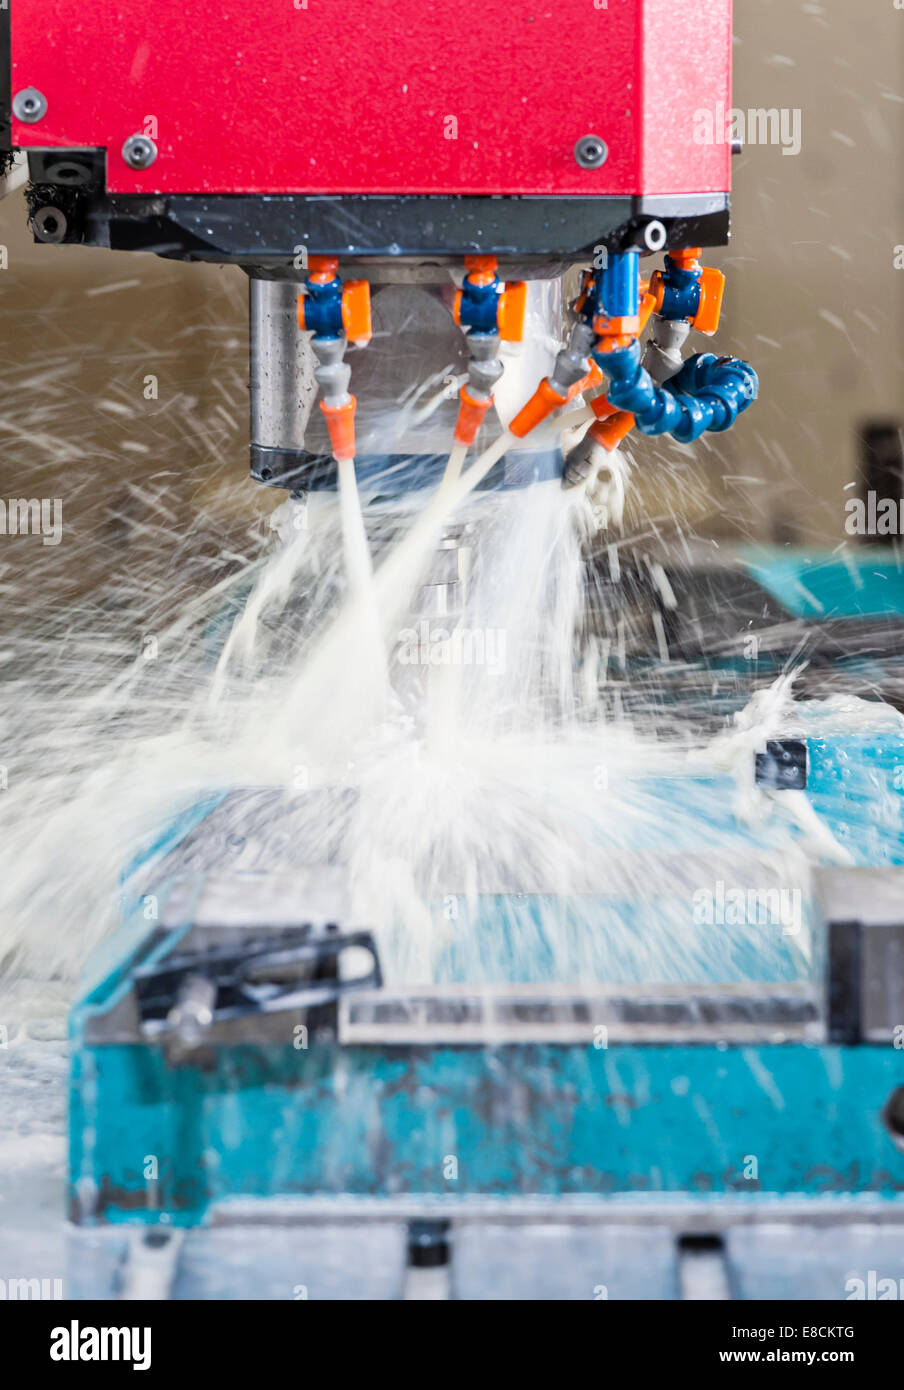 A water-cooled CNC milling cutter 'in action' while producing a custom aluminum spare part Stock Photo